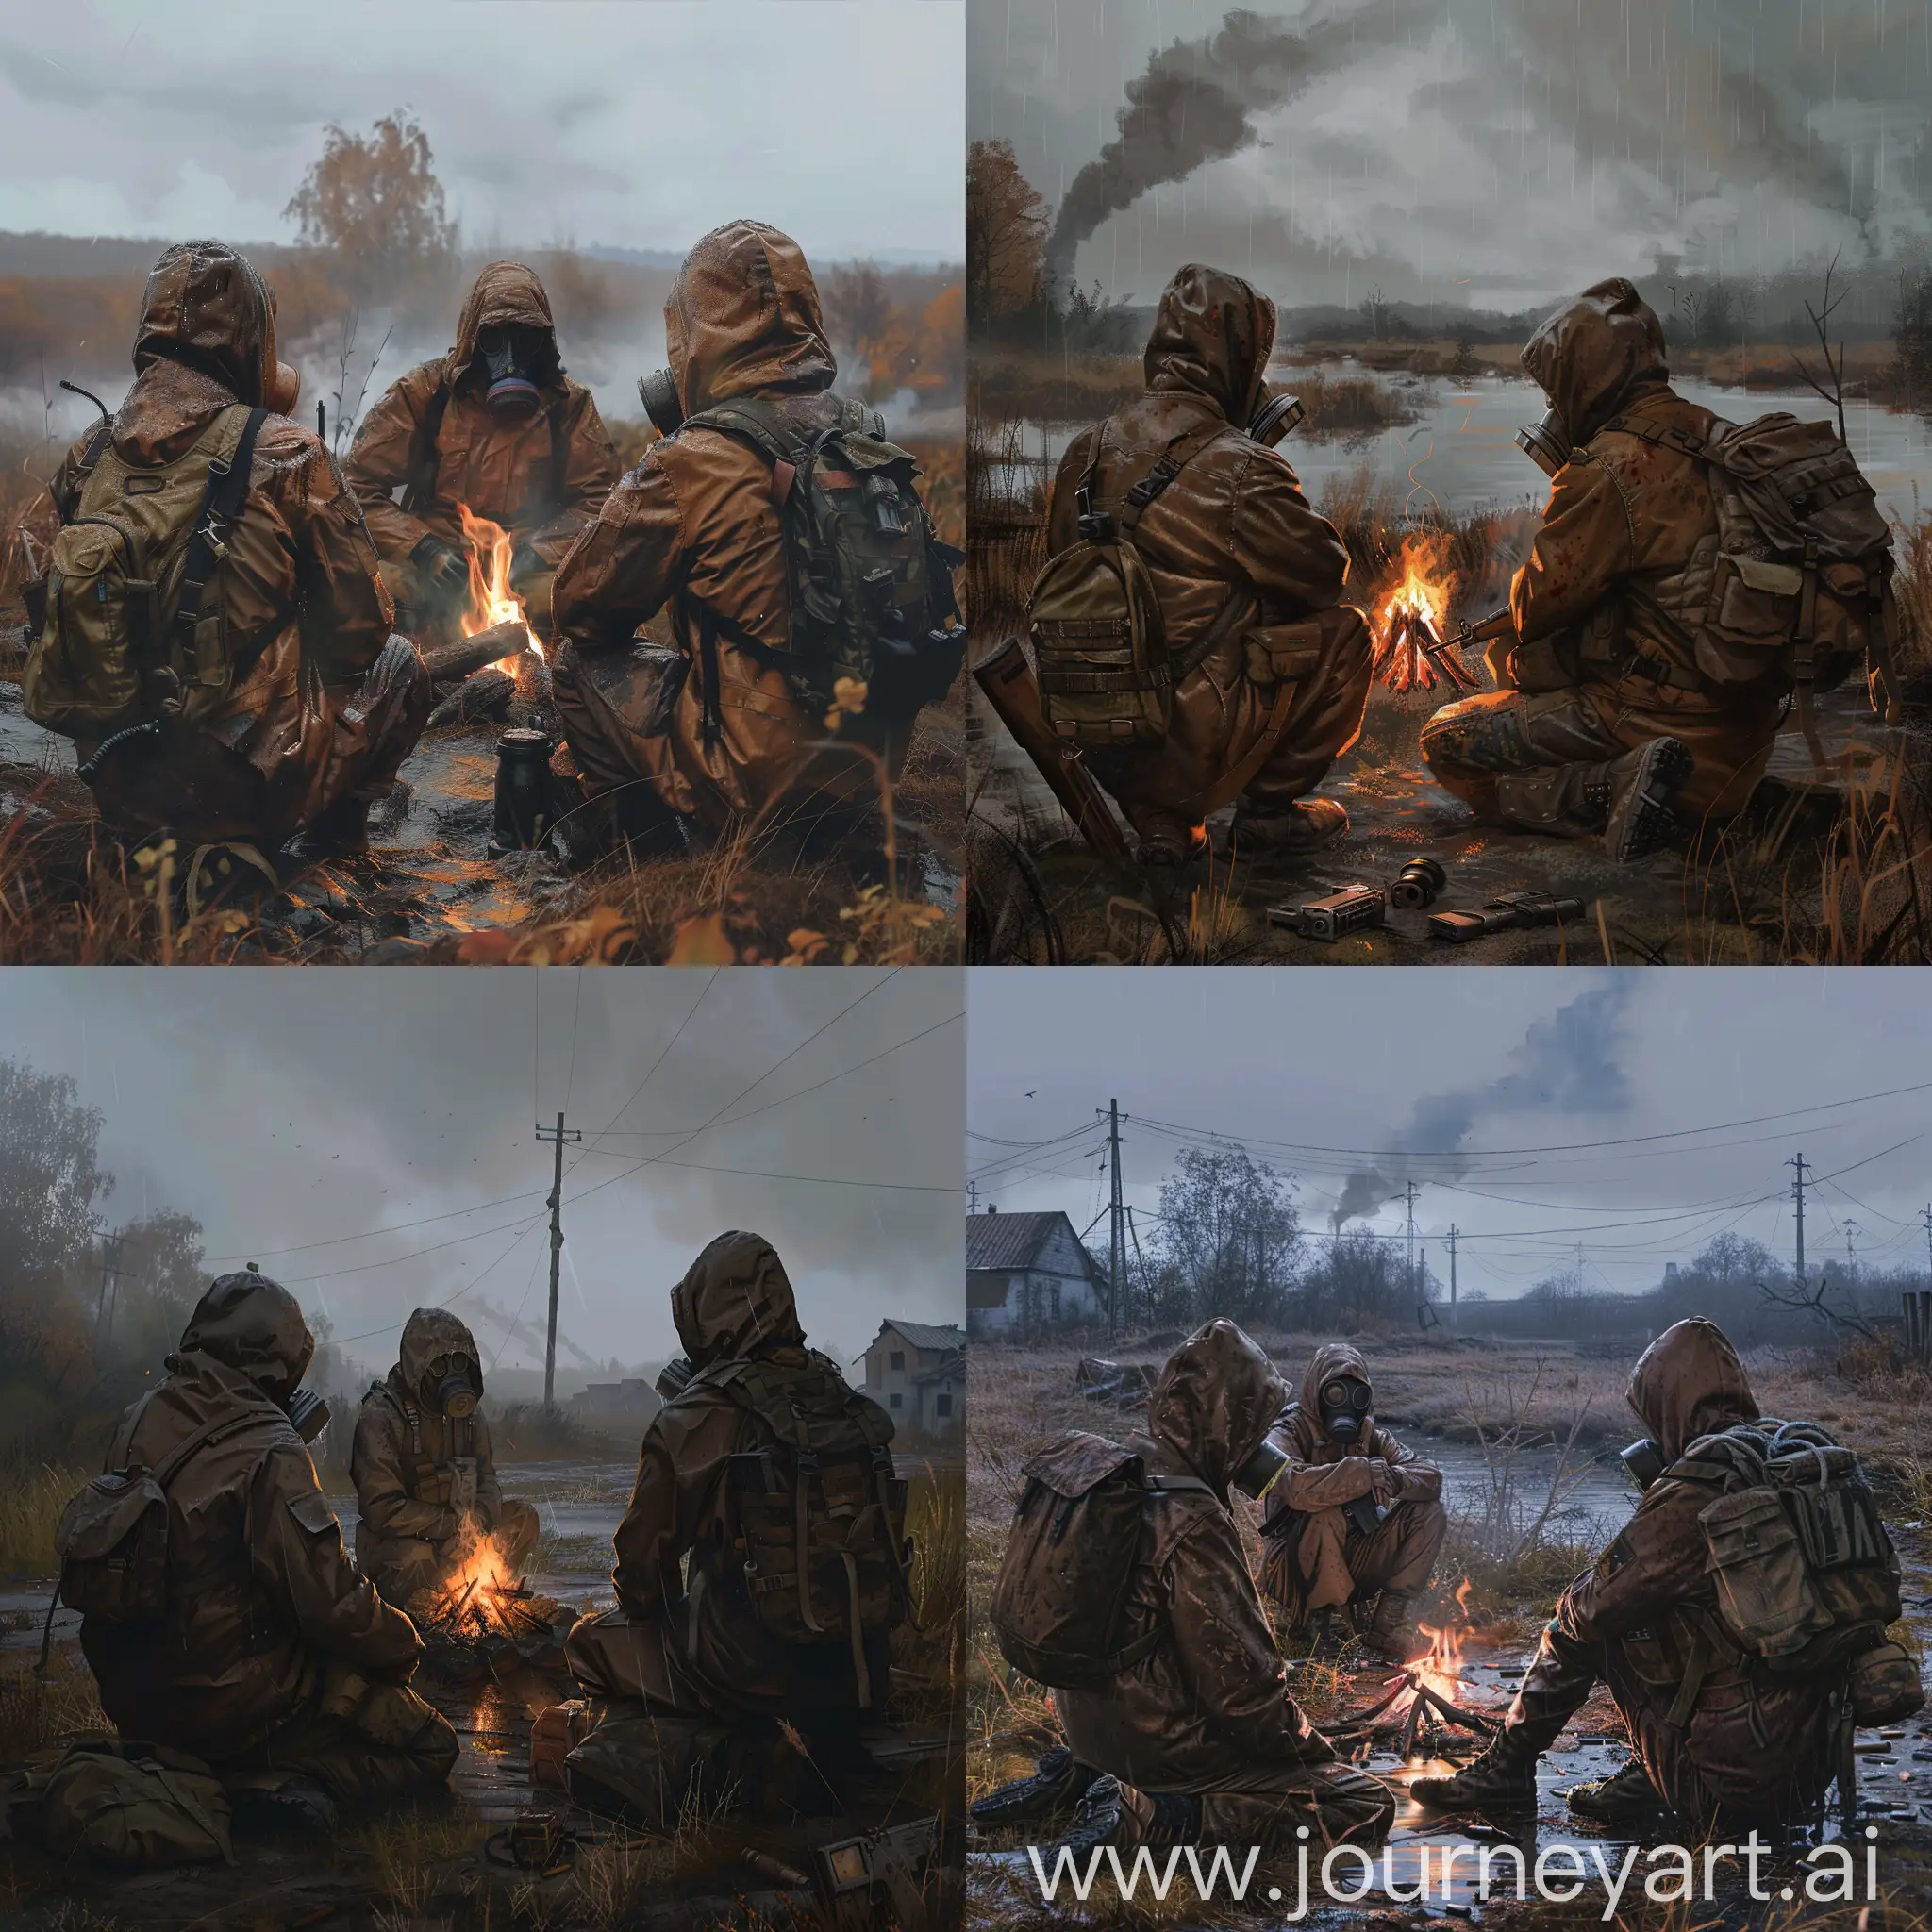 3 stalkers sitting by the small campfire, wearing brown jaket or dirty raincoat, gasmask, sniper soviet rifle or pistol, abandoned soviet village, radiation sky, Chernobyl, military vest, small military backpack on the back, gloomy autumn, digital art.